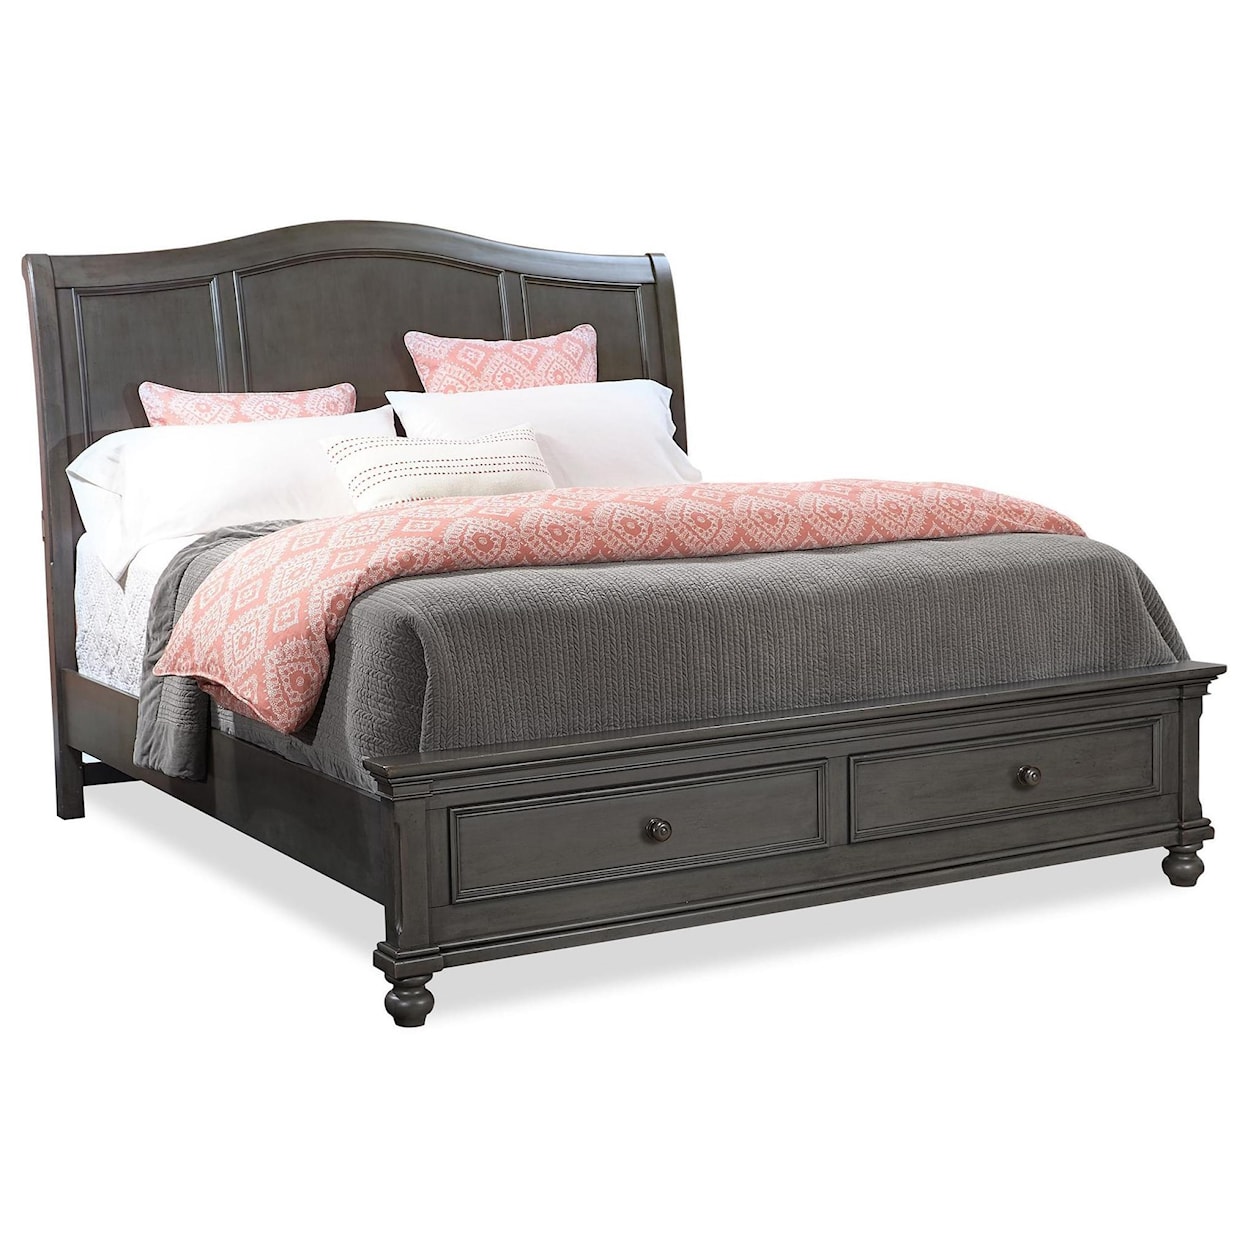 Aspenhome Oxford King Storage Bed